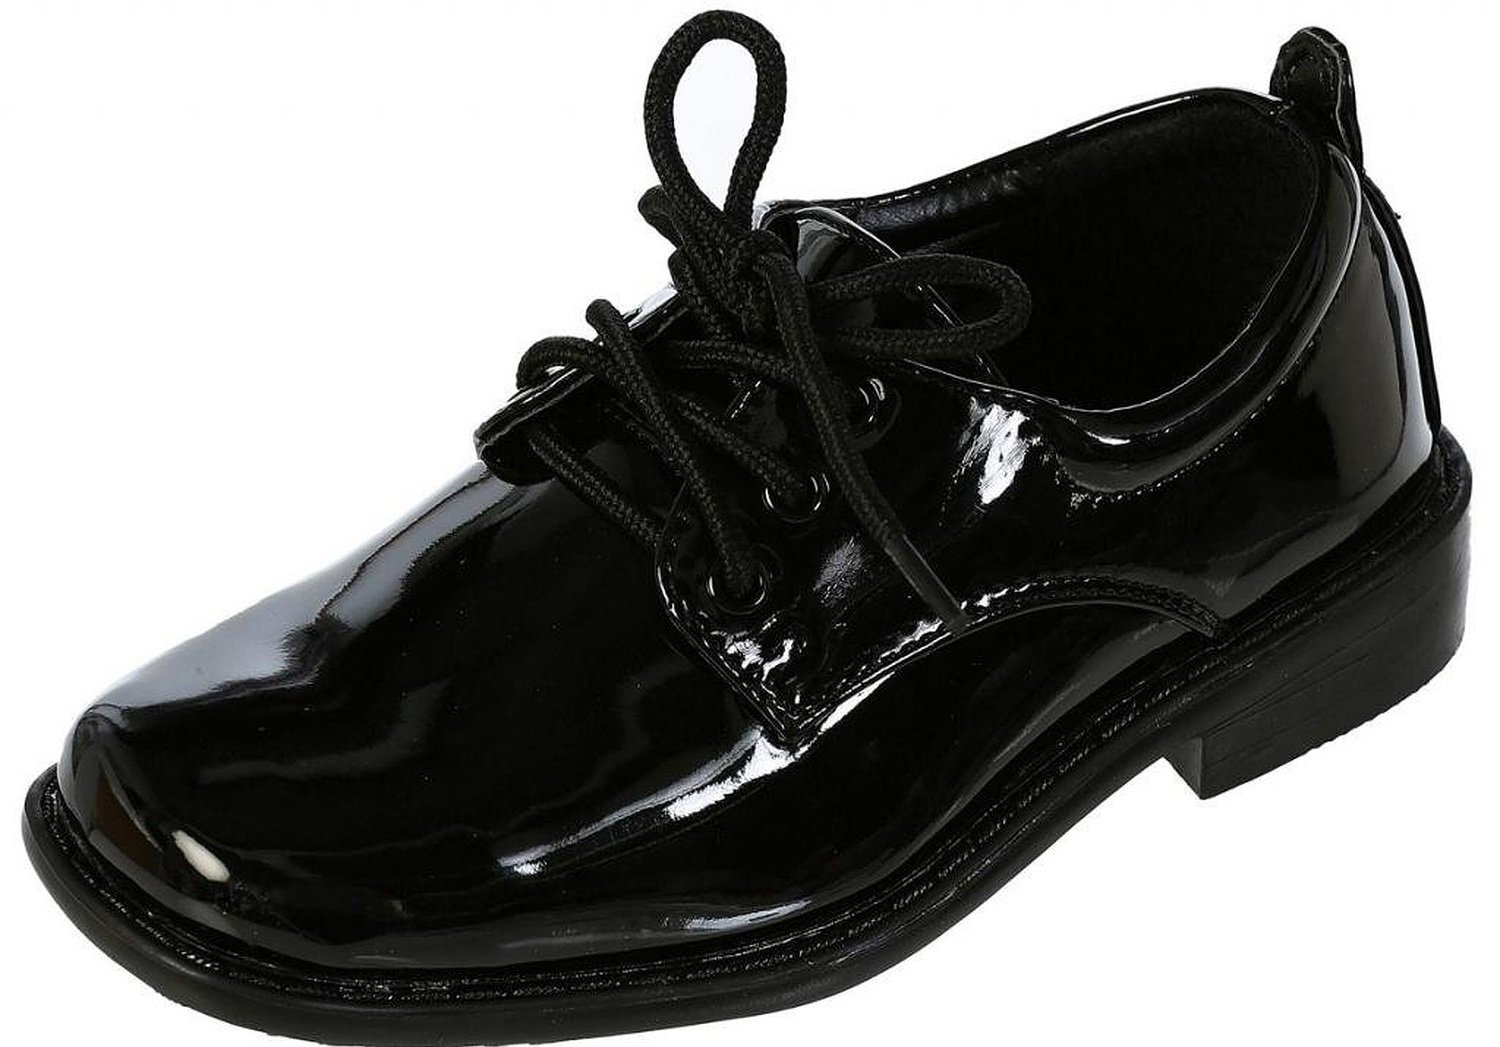 Boys Square Toe Lace Up Oxford Patent Dress Shoes - Available in Black 6 Toddler